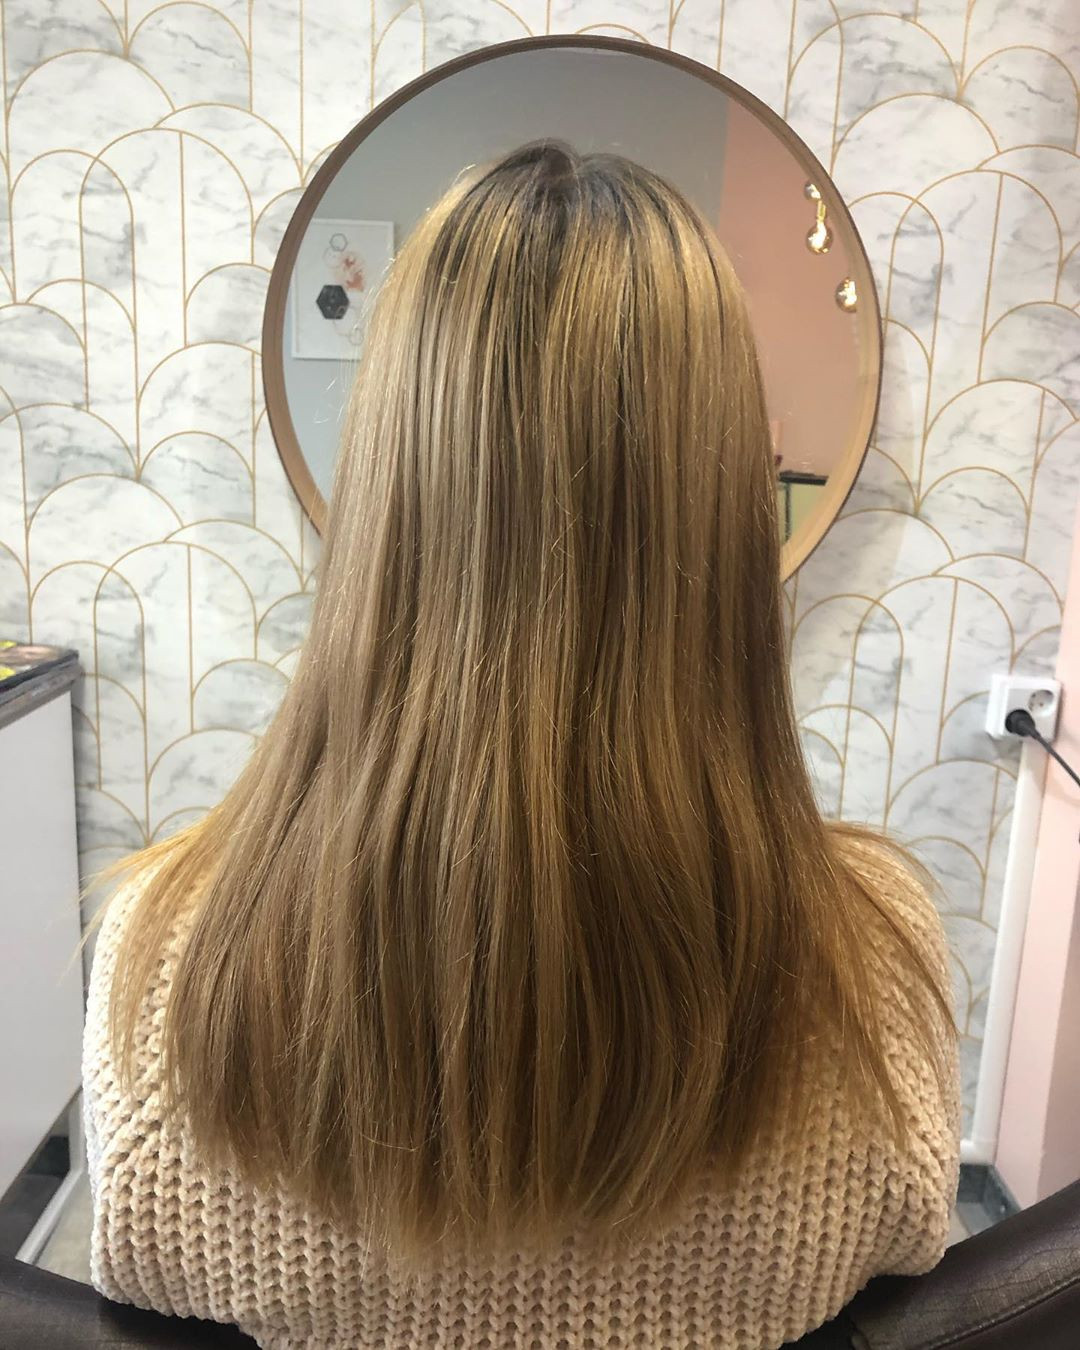 46 Trendy Light Brown Hairstyles Color To Try For A New Look,light brown hair with lowlights,light brown hair color pictures  #balayage #blondebalayage #hairpainting #hairpainters #bronde #brondebalayage #highlights #ombrehair